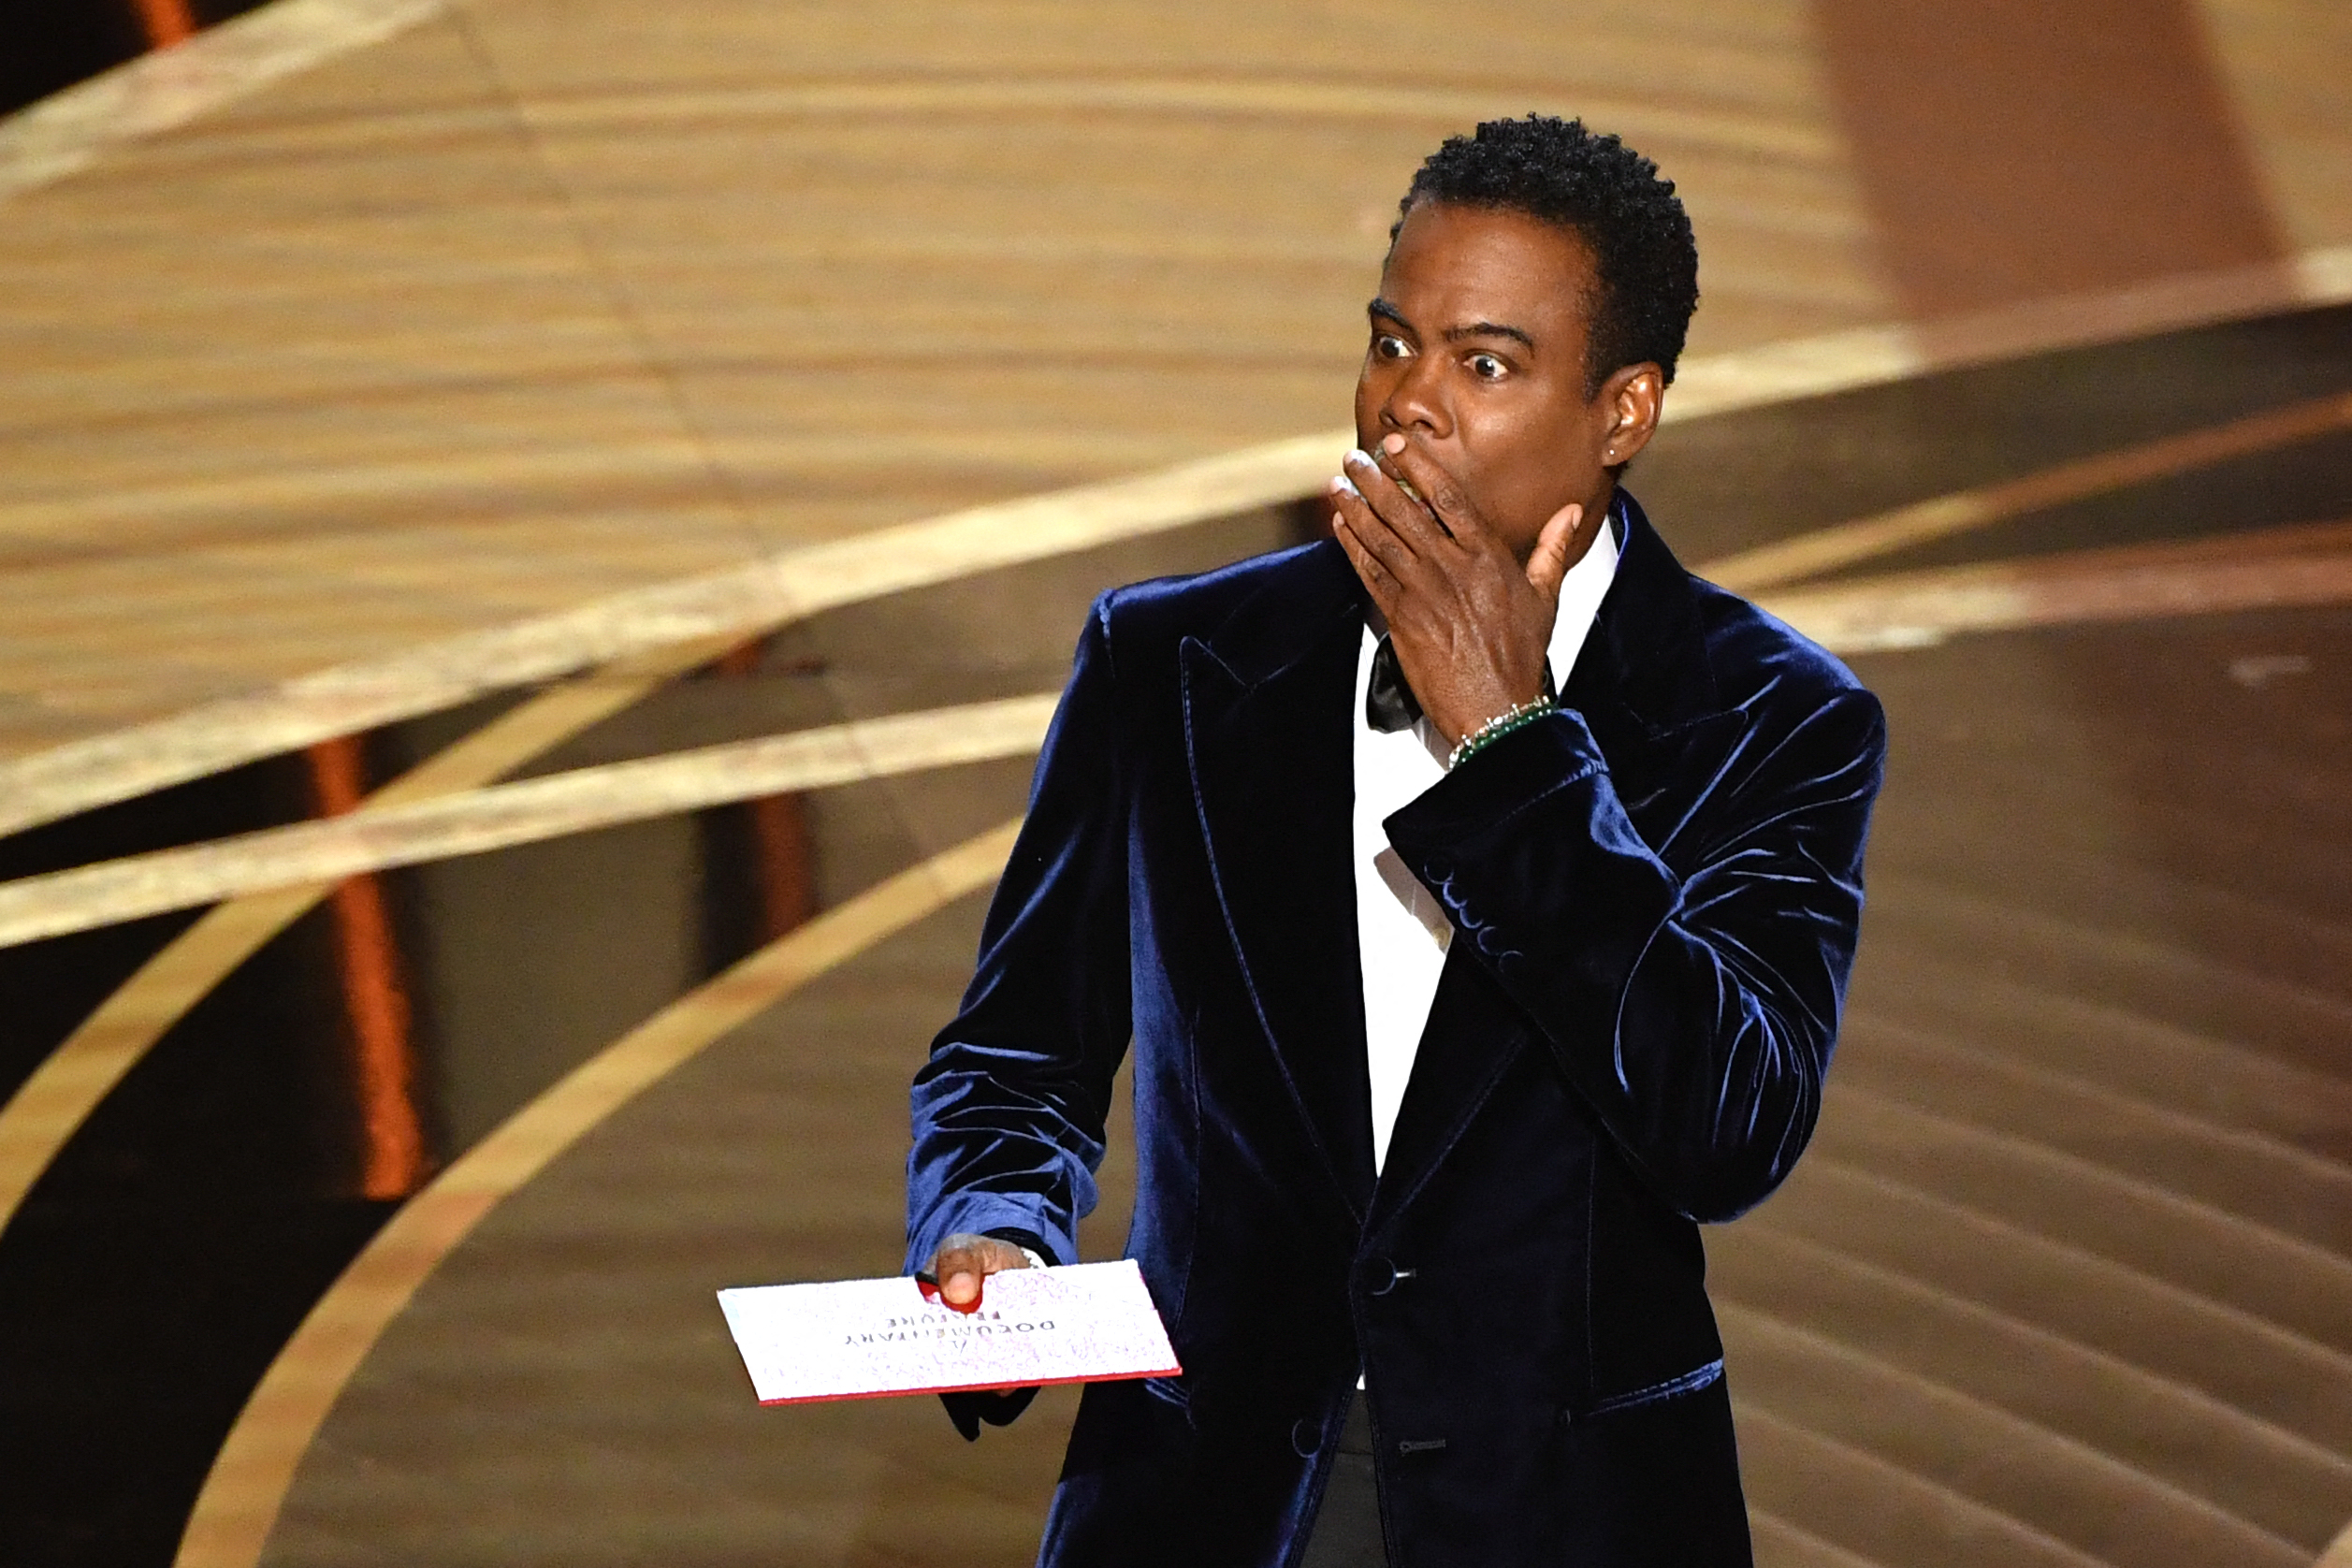 Hear what Chris Rock said on stage about the Will Smith Oscars slap - CNN  Video